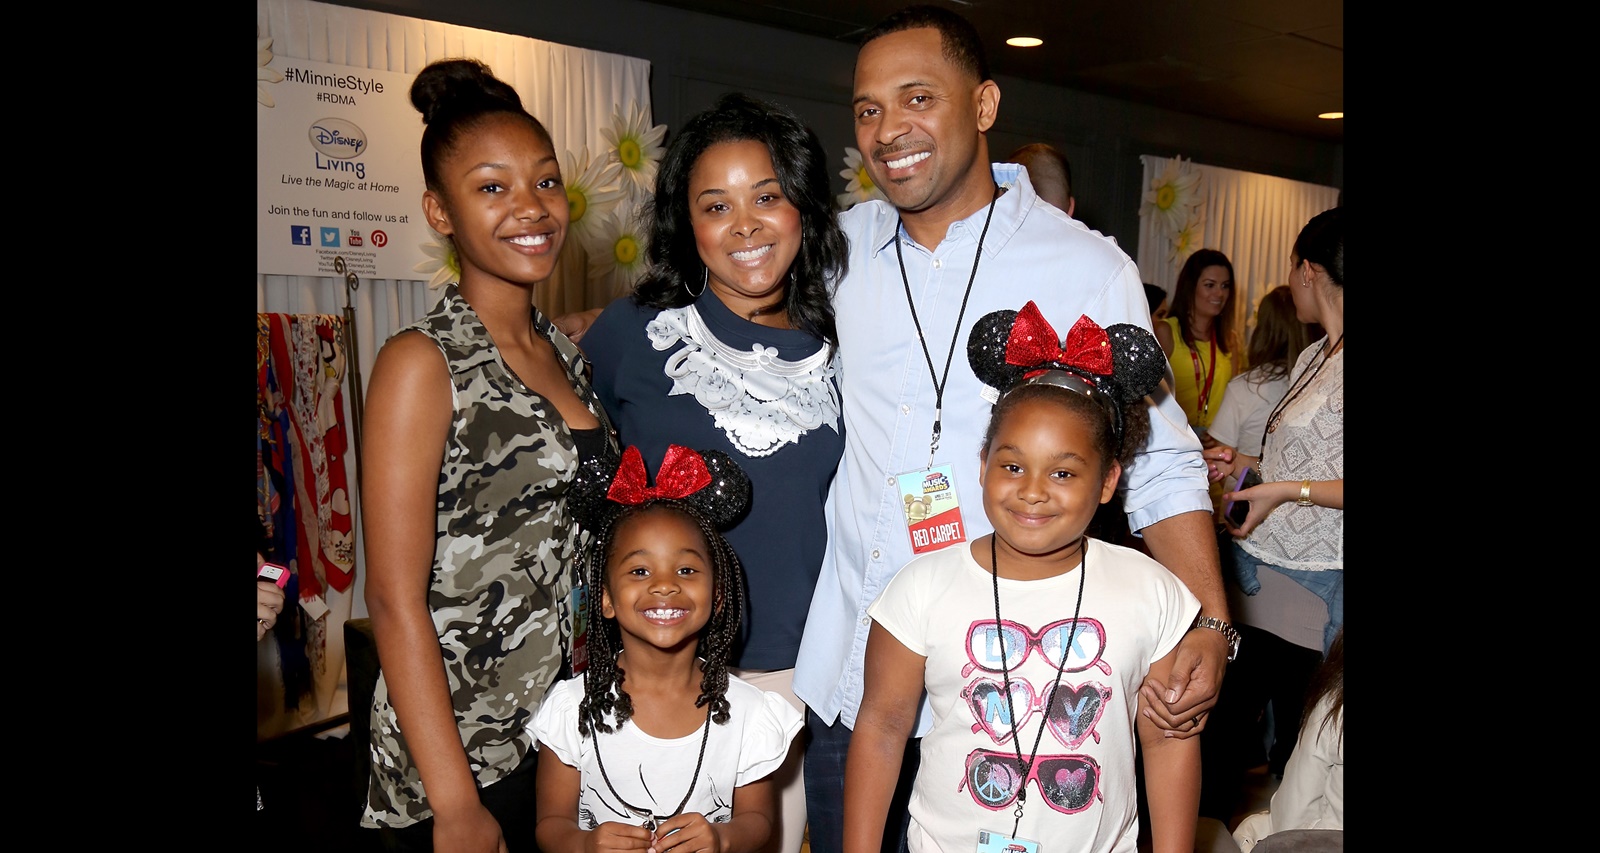 Mike Epps’ Family: Facts to Know about the Comedian’s Children, Parents & Ex-Wife